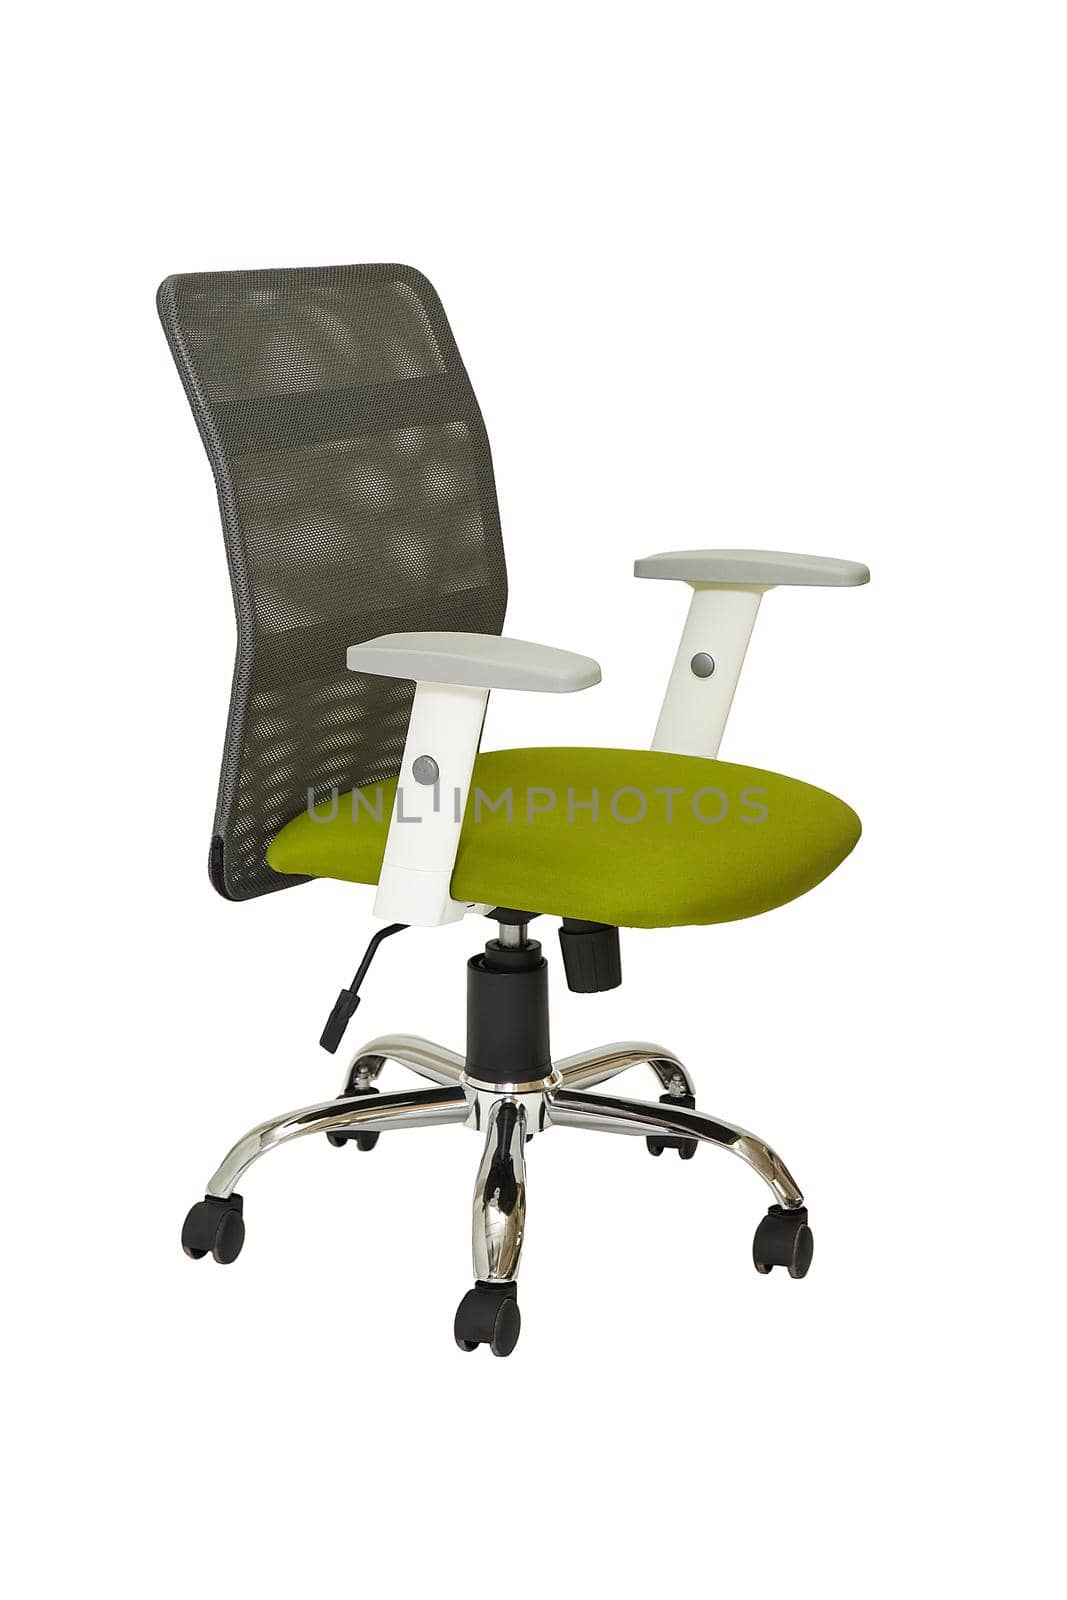 light green fabric office armchair on wheels with grey plastic back isolated on white background. side view